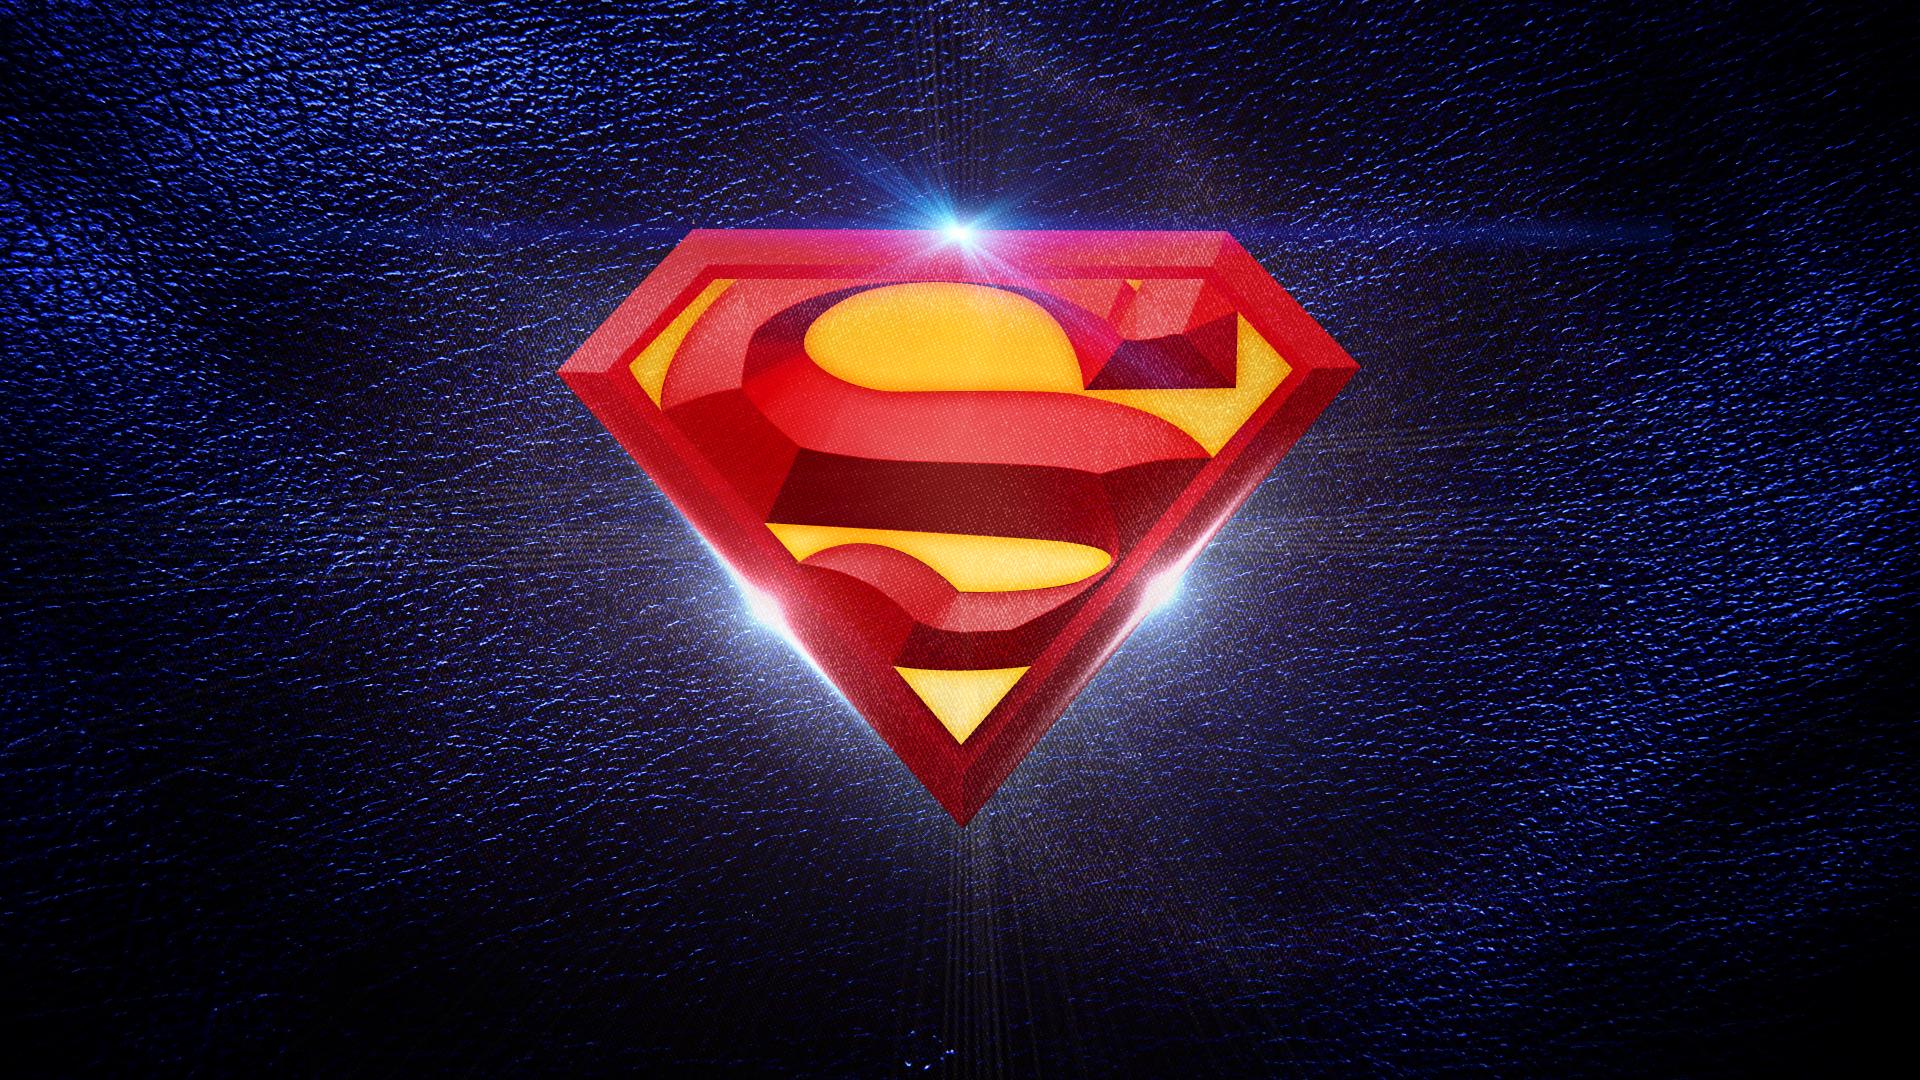 Superman logo wallpaper - (#153234) - High Quality and Resolution ...